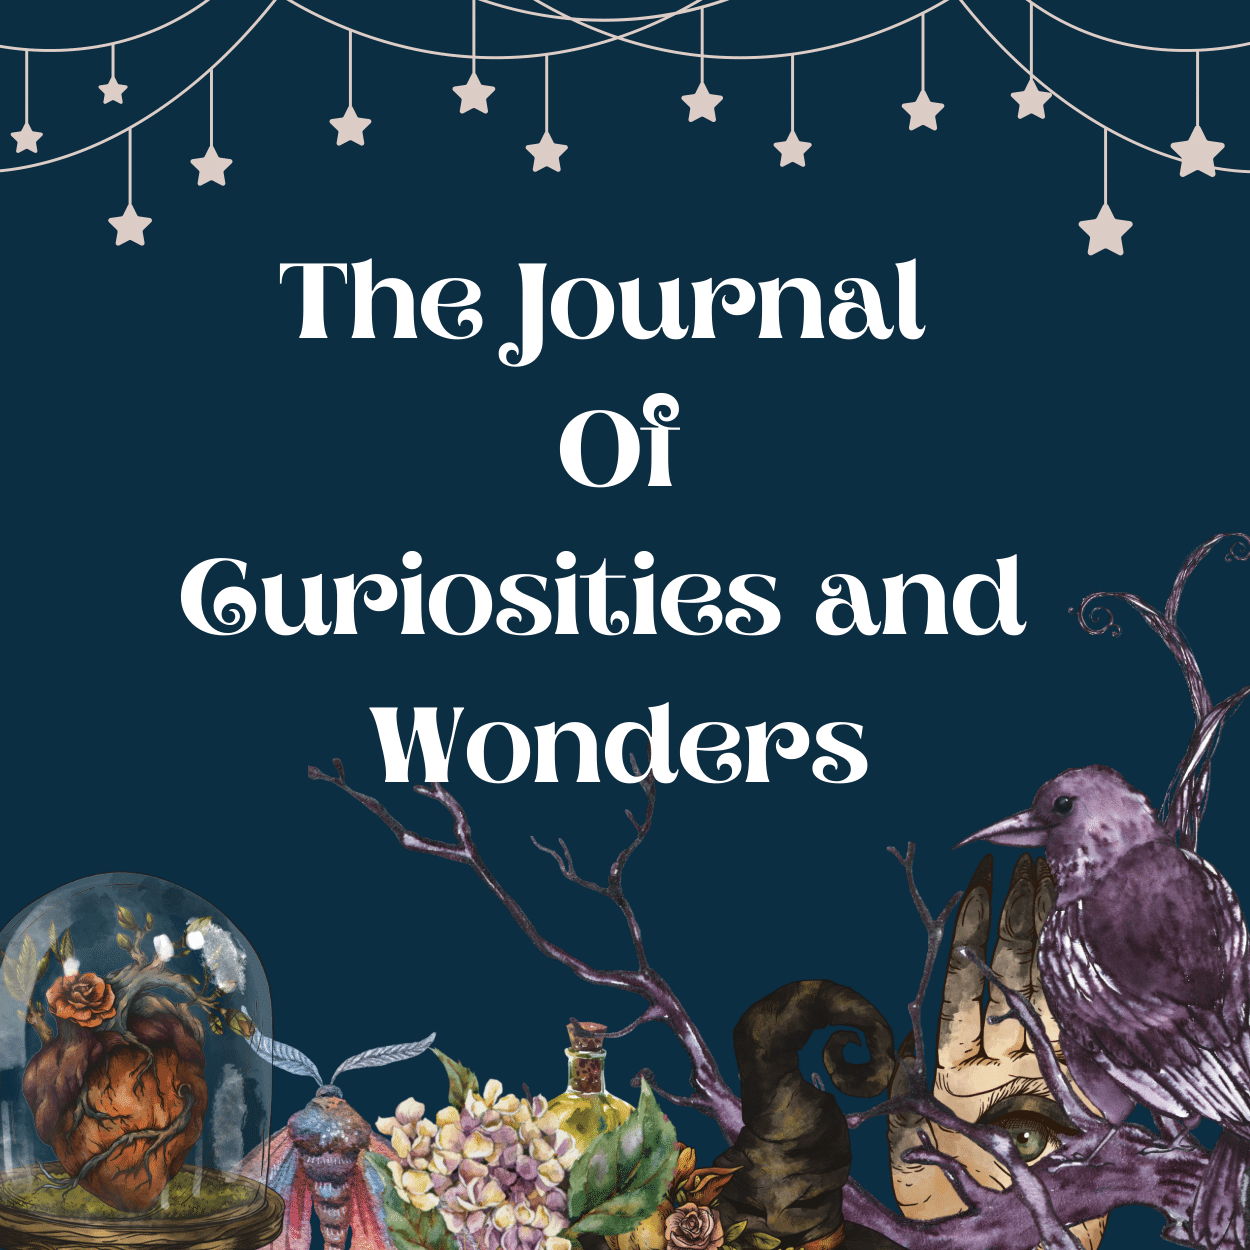 A Journal of Wonders and Curiosities